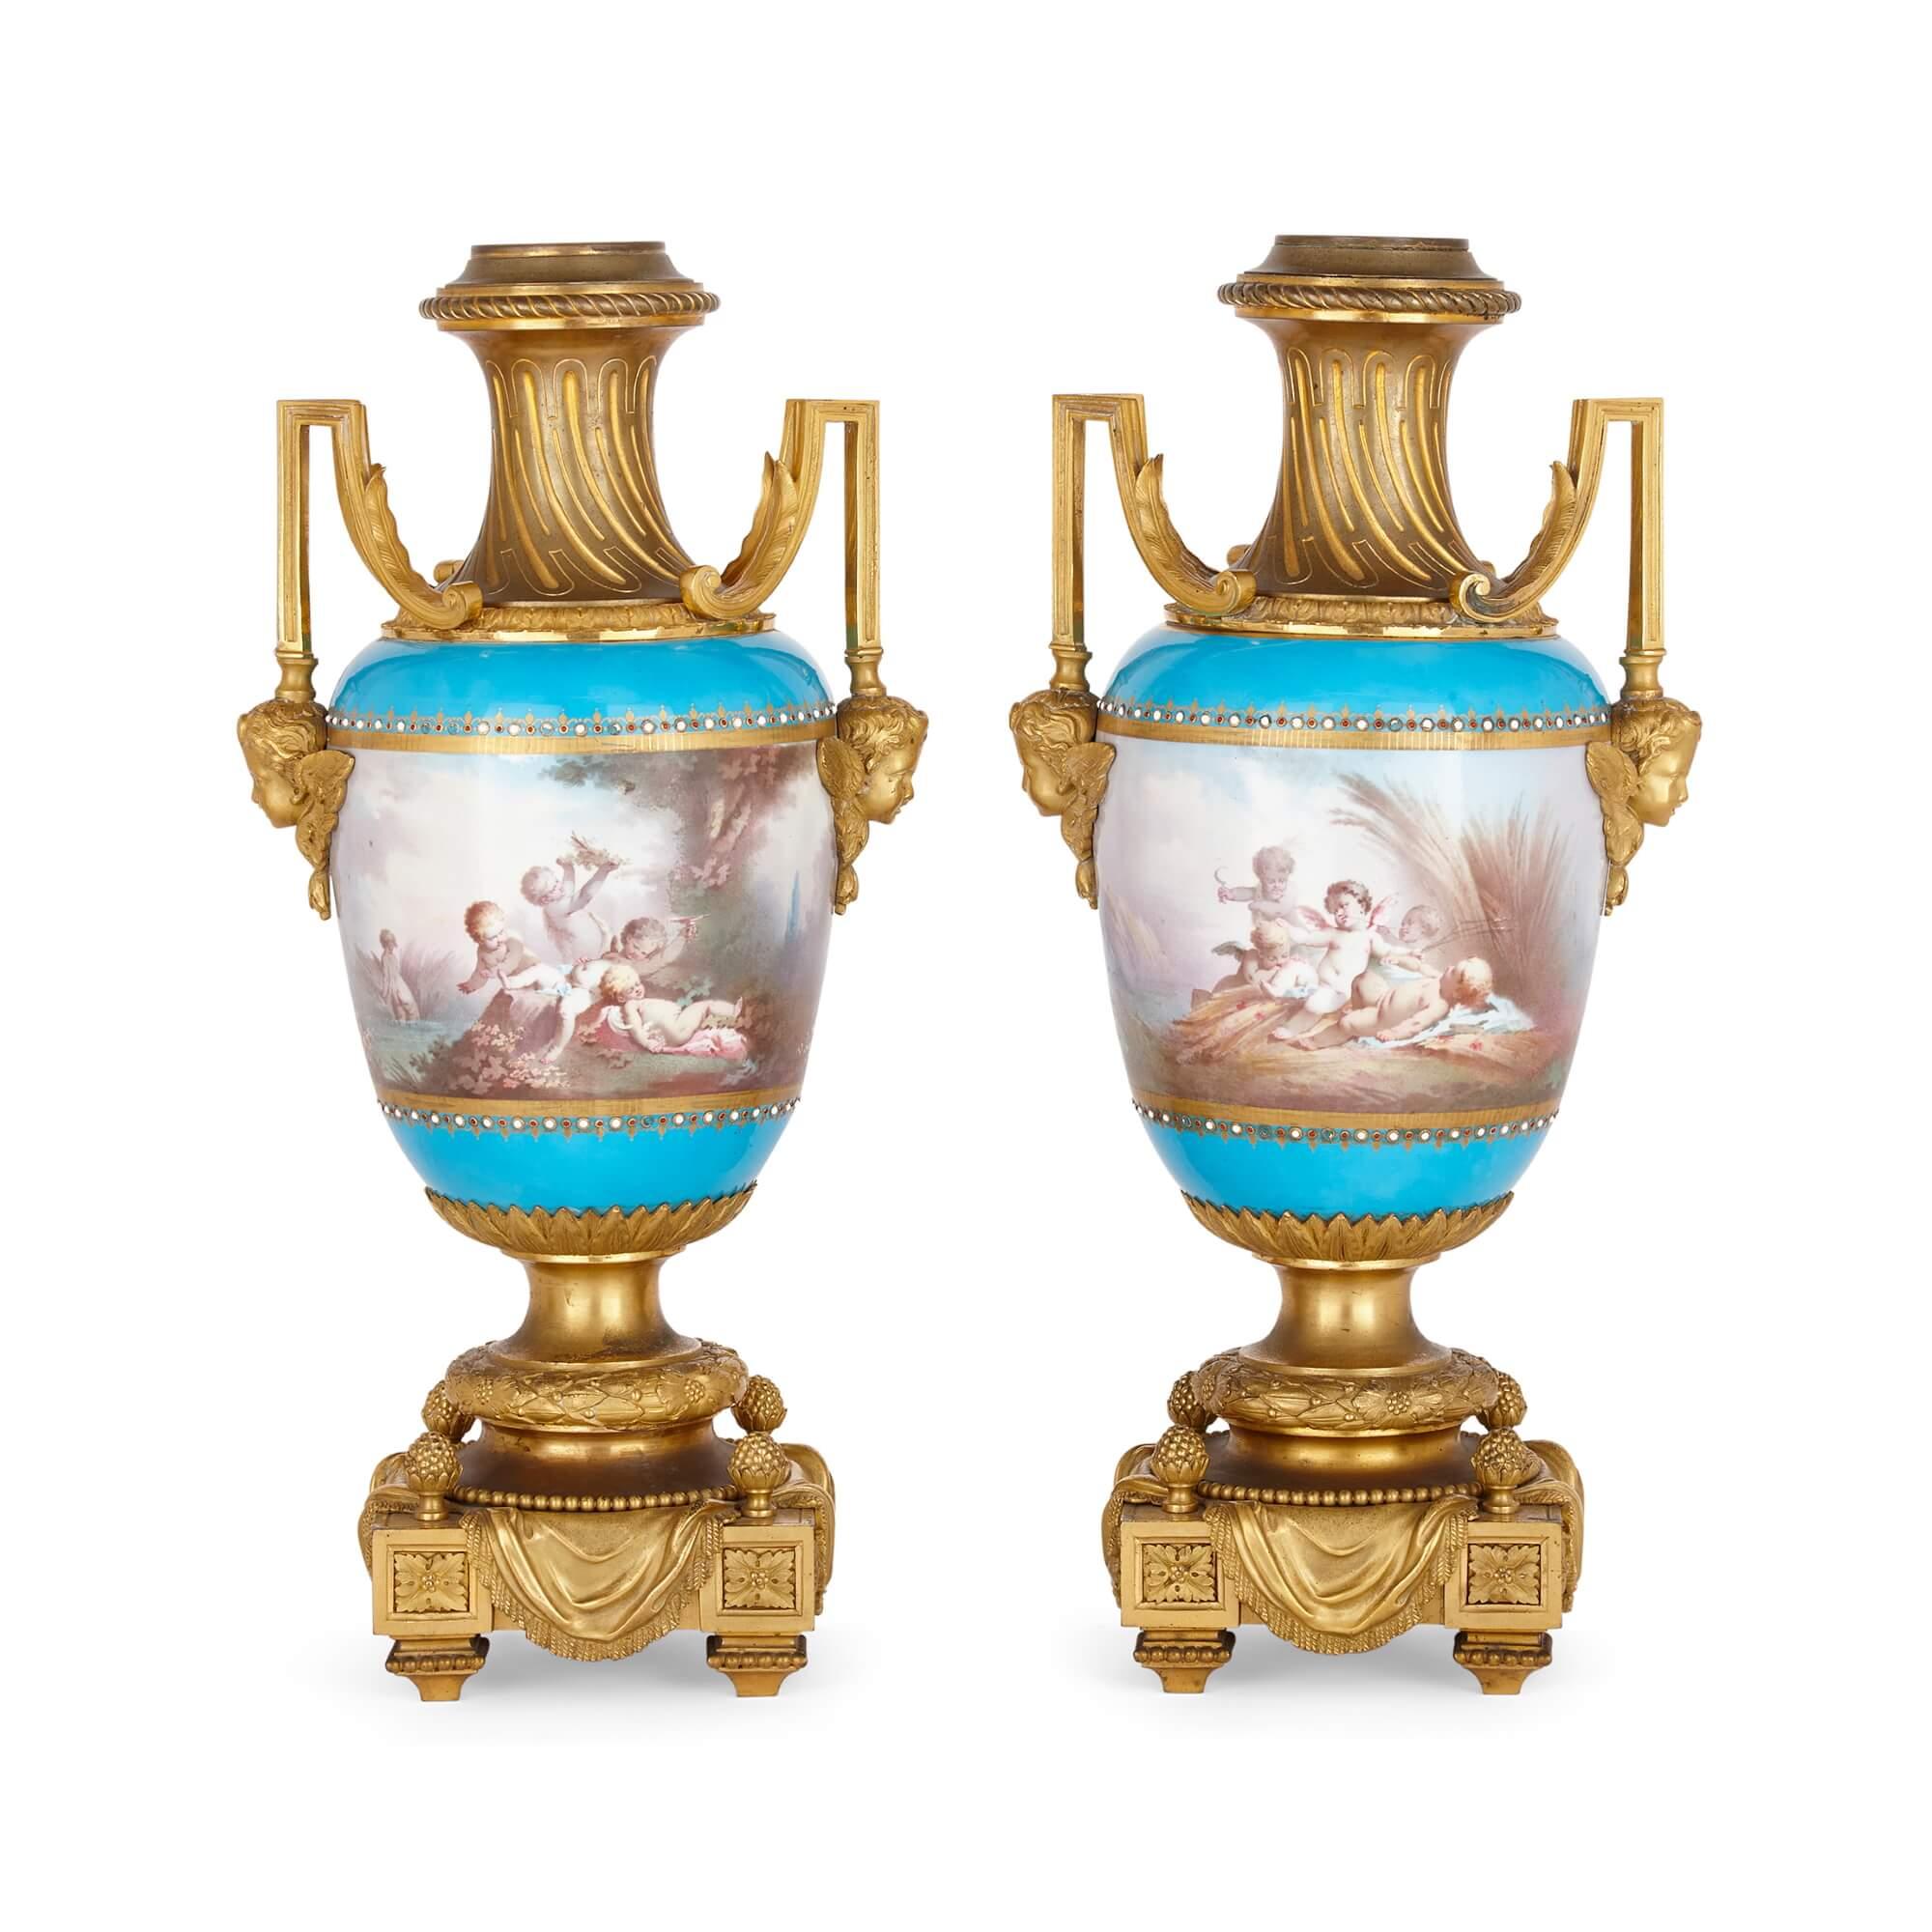 French Ormolu and Sèvres-style porcelain three-piece garniture suite For Sale